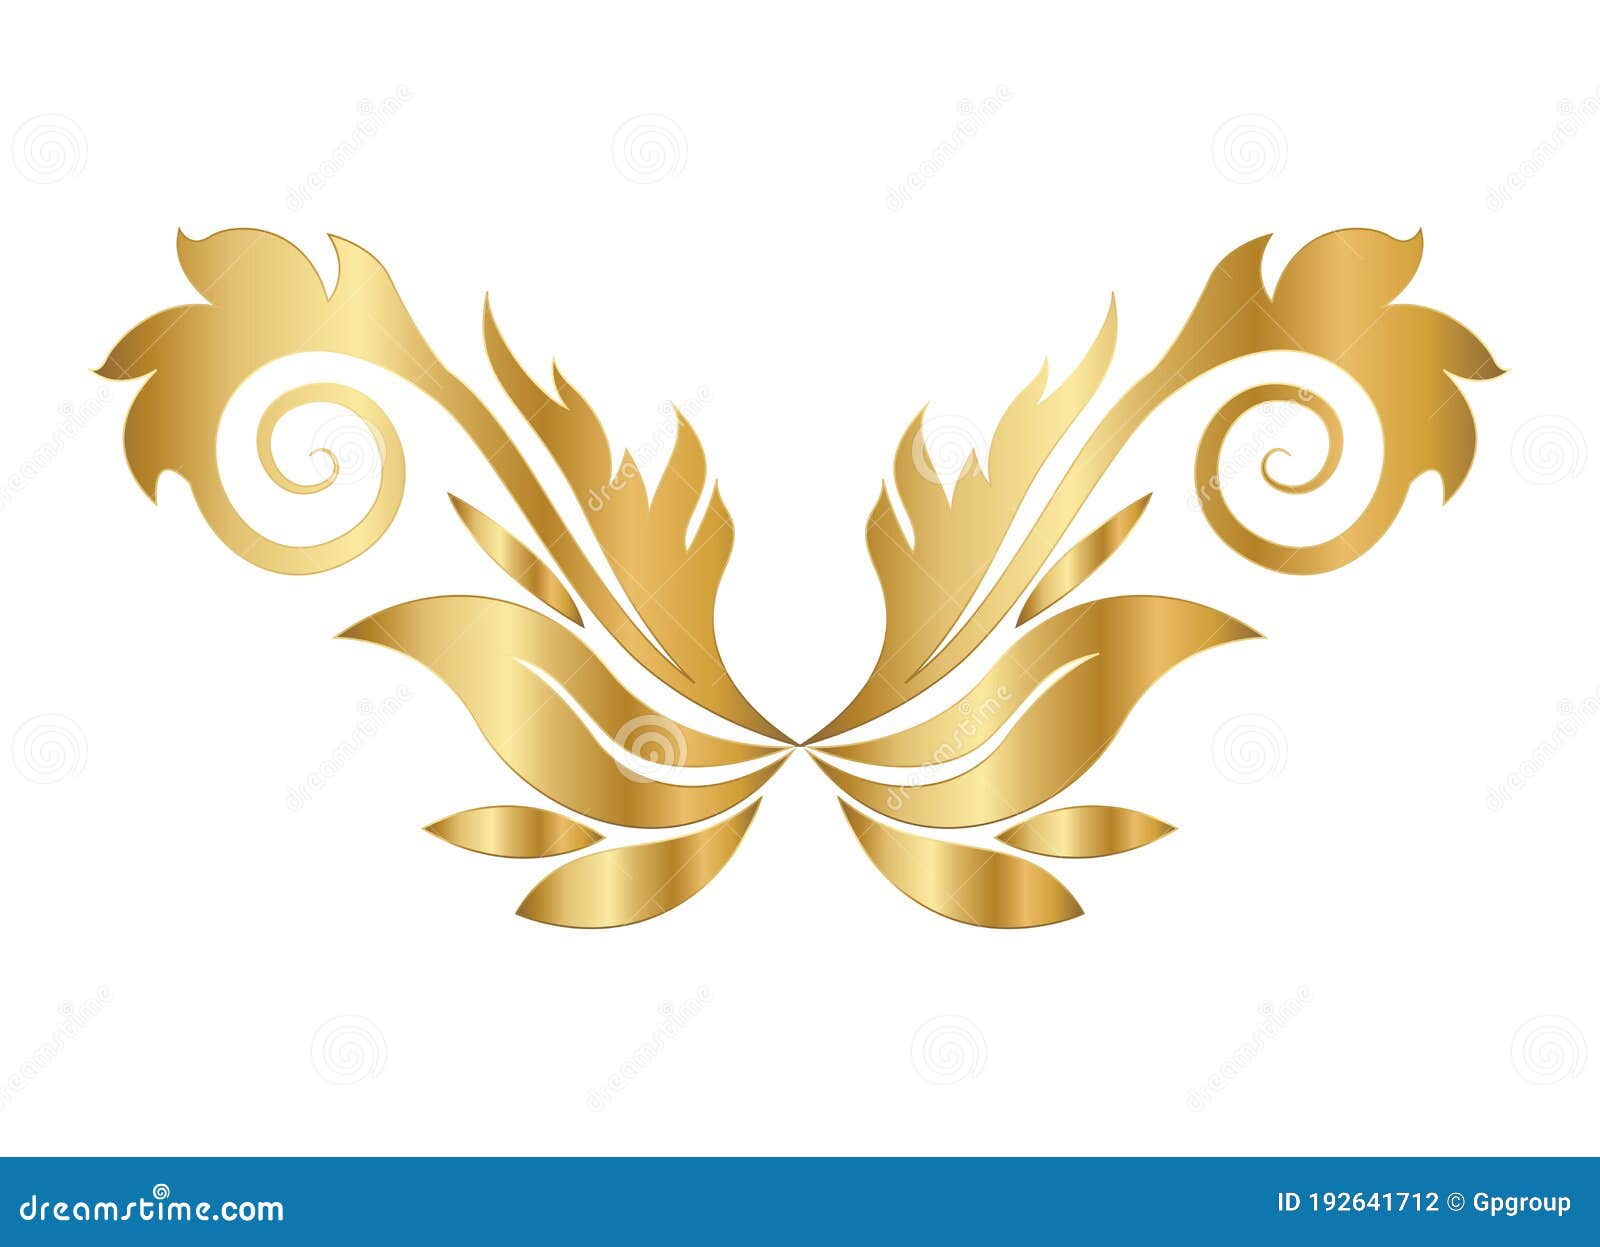 Gold Leaves Shaped Ornament with Curves Vector Design Stock Vector -  Illustration of symbol, element: 192641712